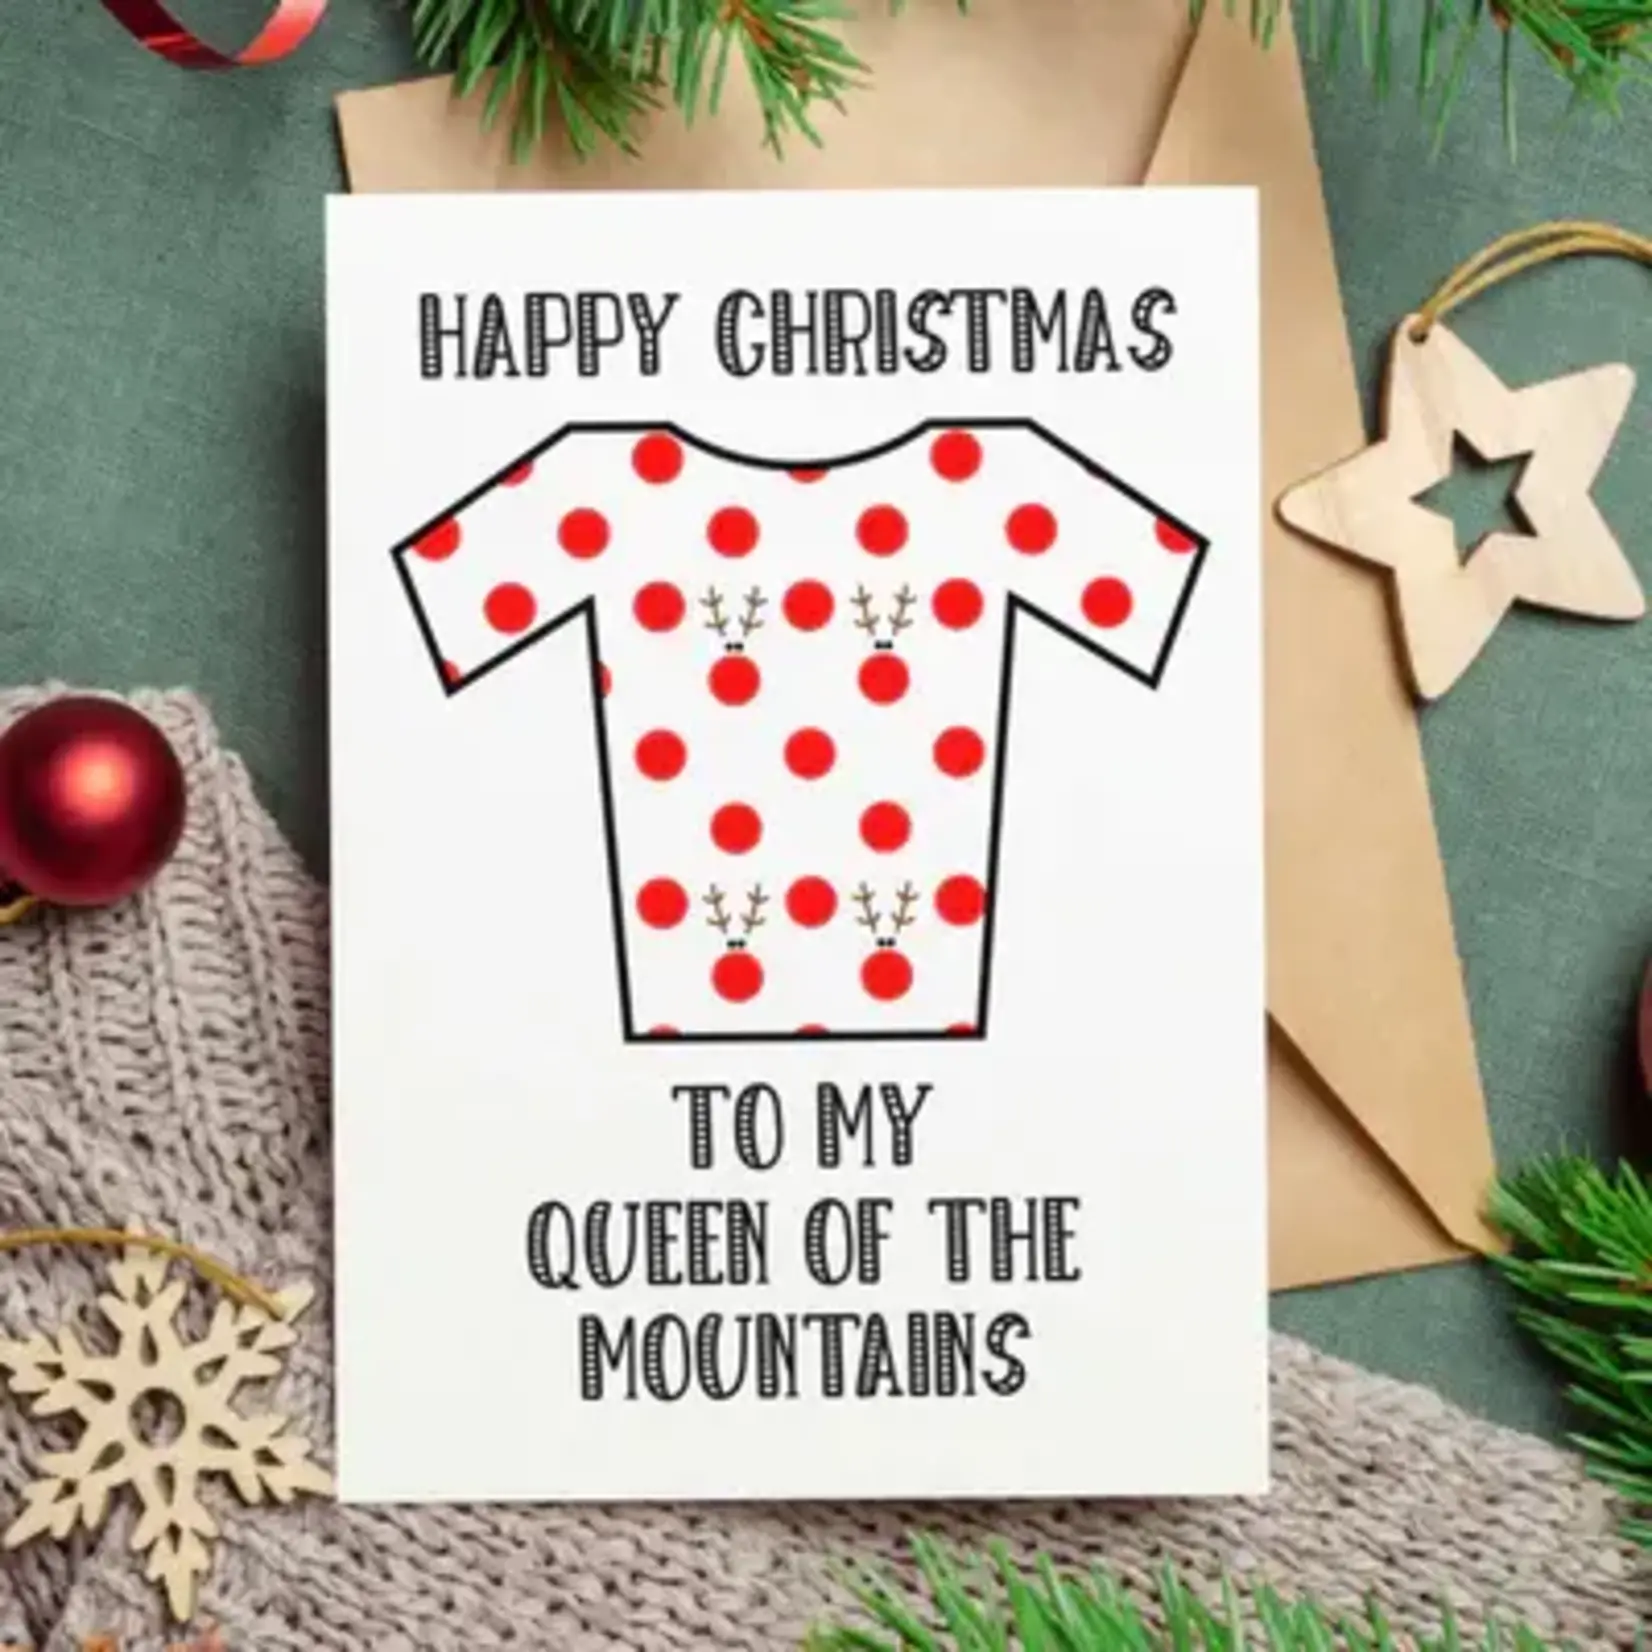 EllieBeanPrints Happy Christmas To My Queen Of The Mountains Cycling Christmas Card Happy Christmas To My Queen Of The Mountains Cycling Christmas Card Happy Christmas To My Queen Of The Mountains Cycling Christmas Card HAPPY CHRISTMAS TO MY QUEEN OF THE MOUNTAINS CYCLIN